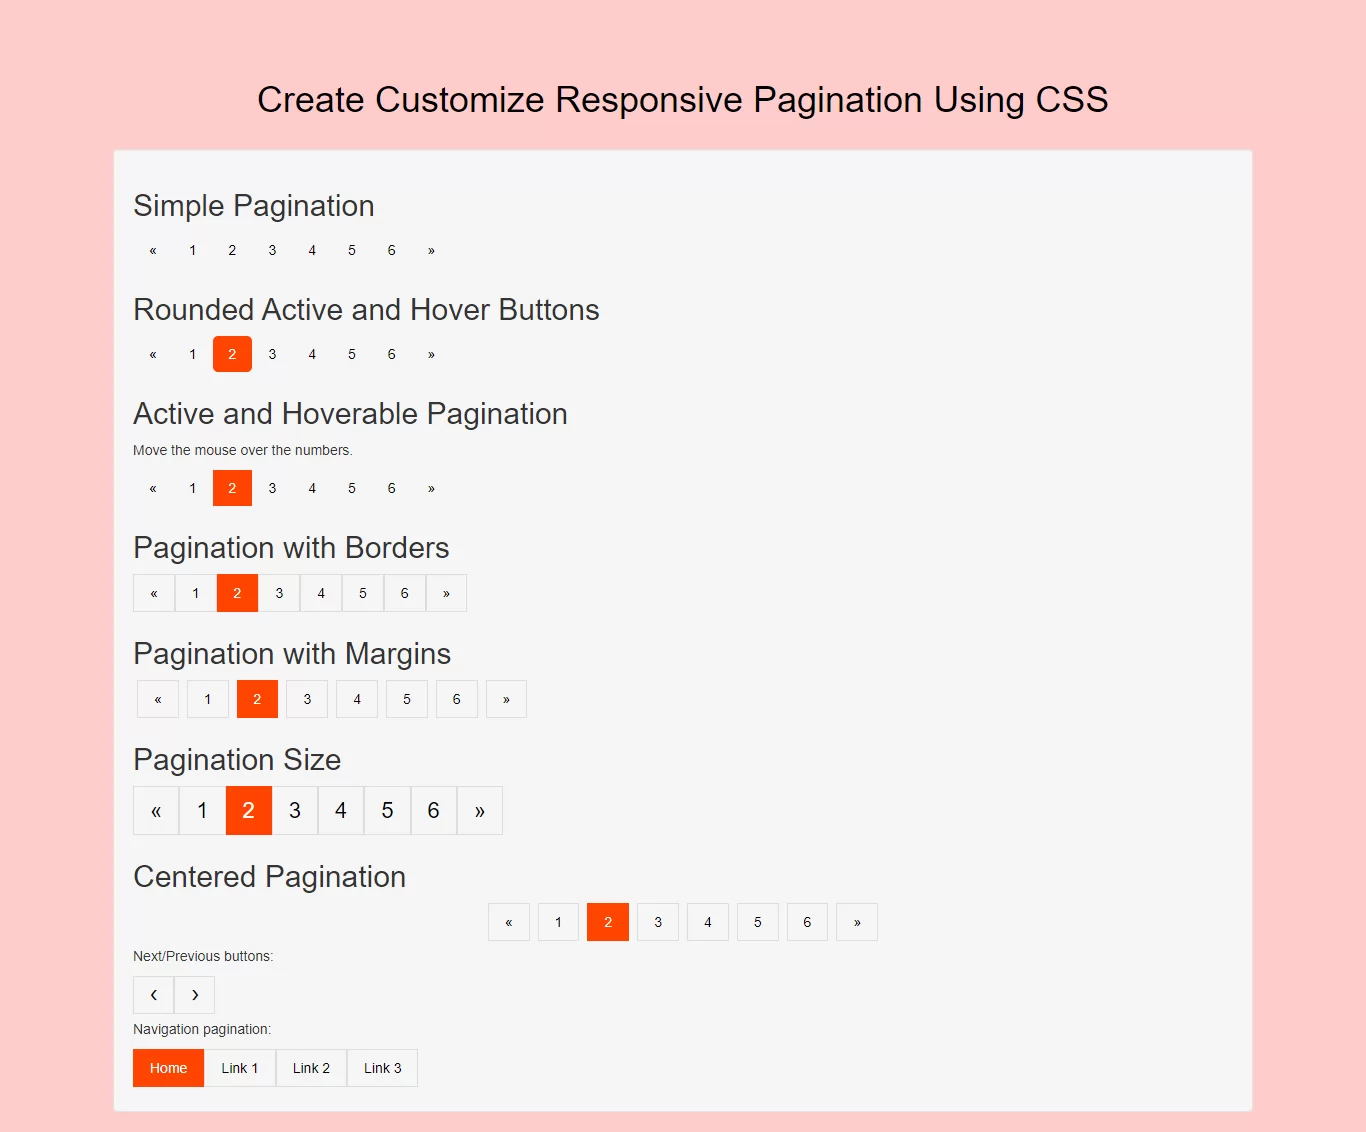 How To Create Customize Responsive Pagination Using CSS